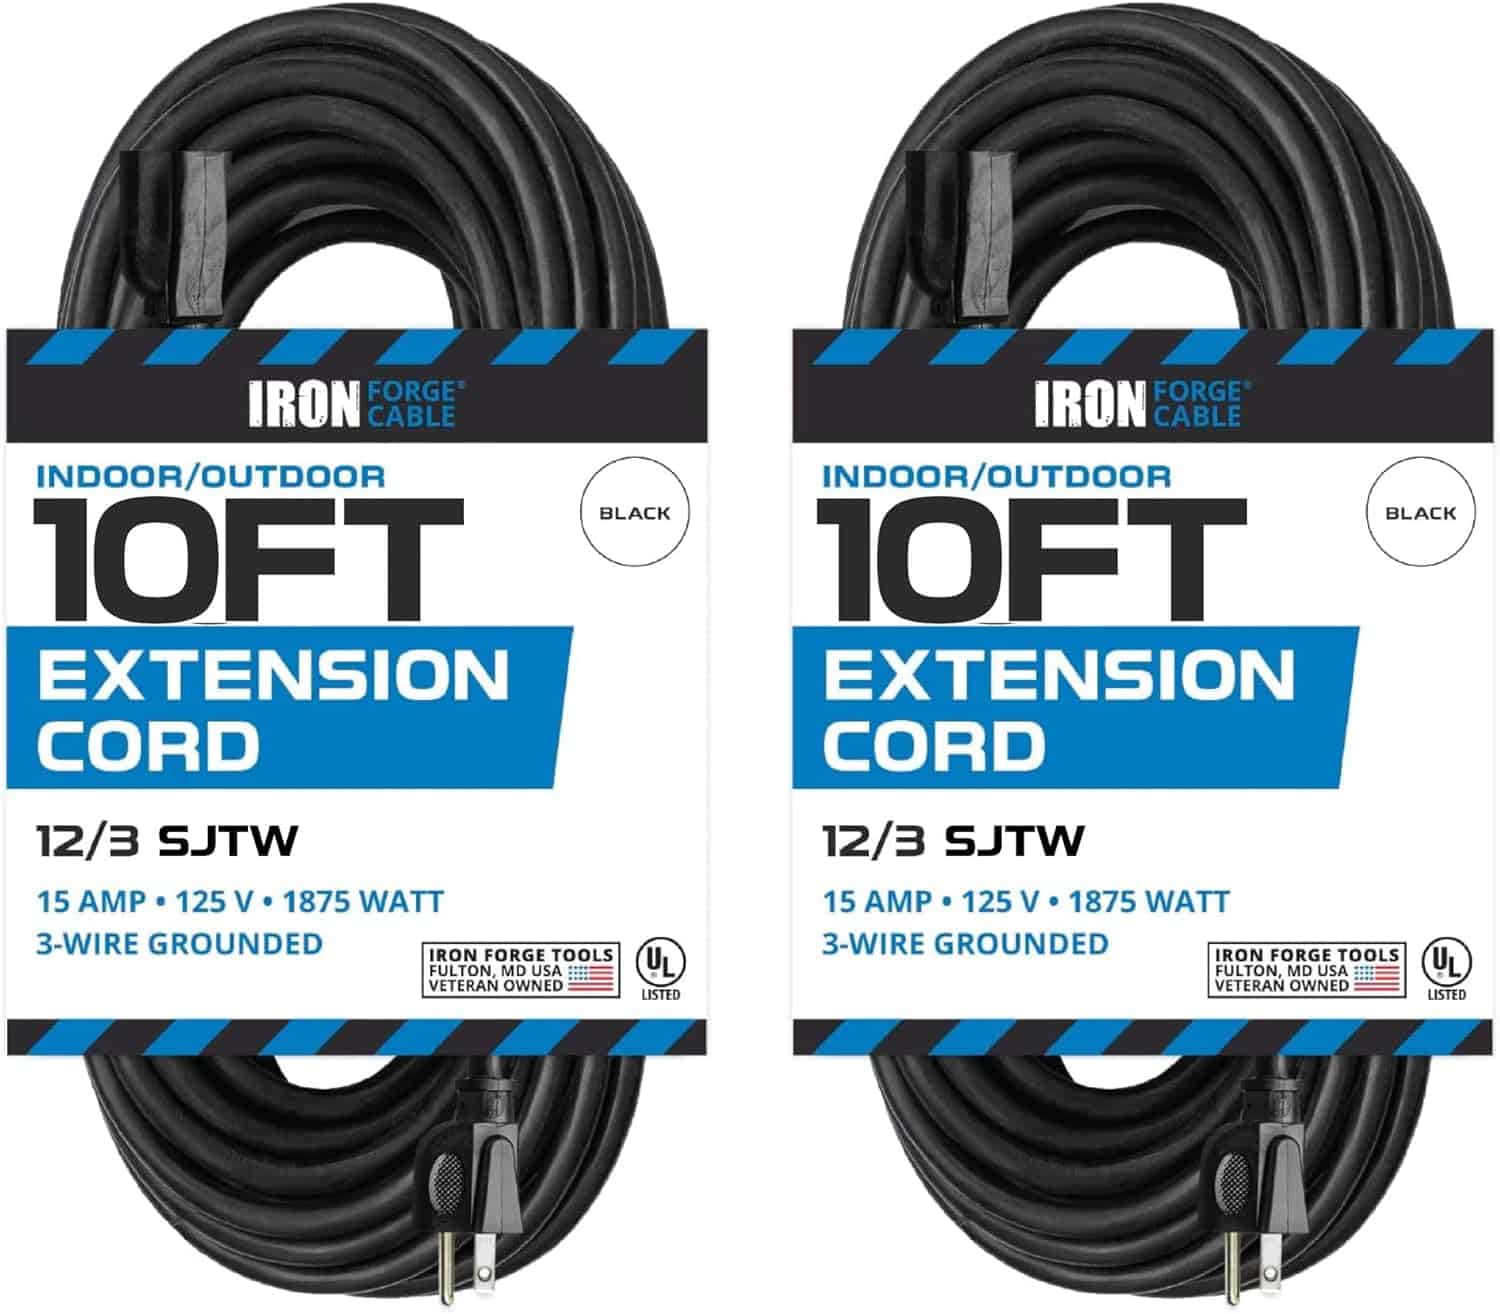 IRON FORGE CABLE 2 Pack of 10 Ft Heavy Duty Extension Cord Outdoor, 12 Gauge Extension Cord 10 ft 3 Prong, 12 3 Black Extension Cable for Major Appliances, US Veteran Owned 1